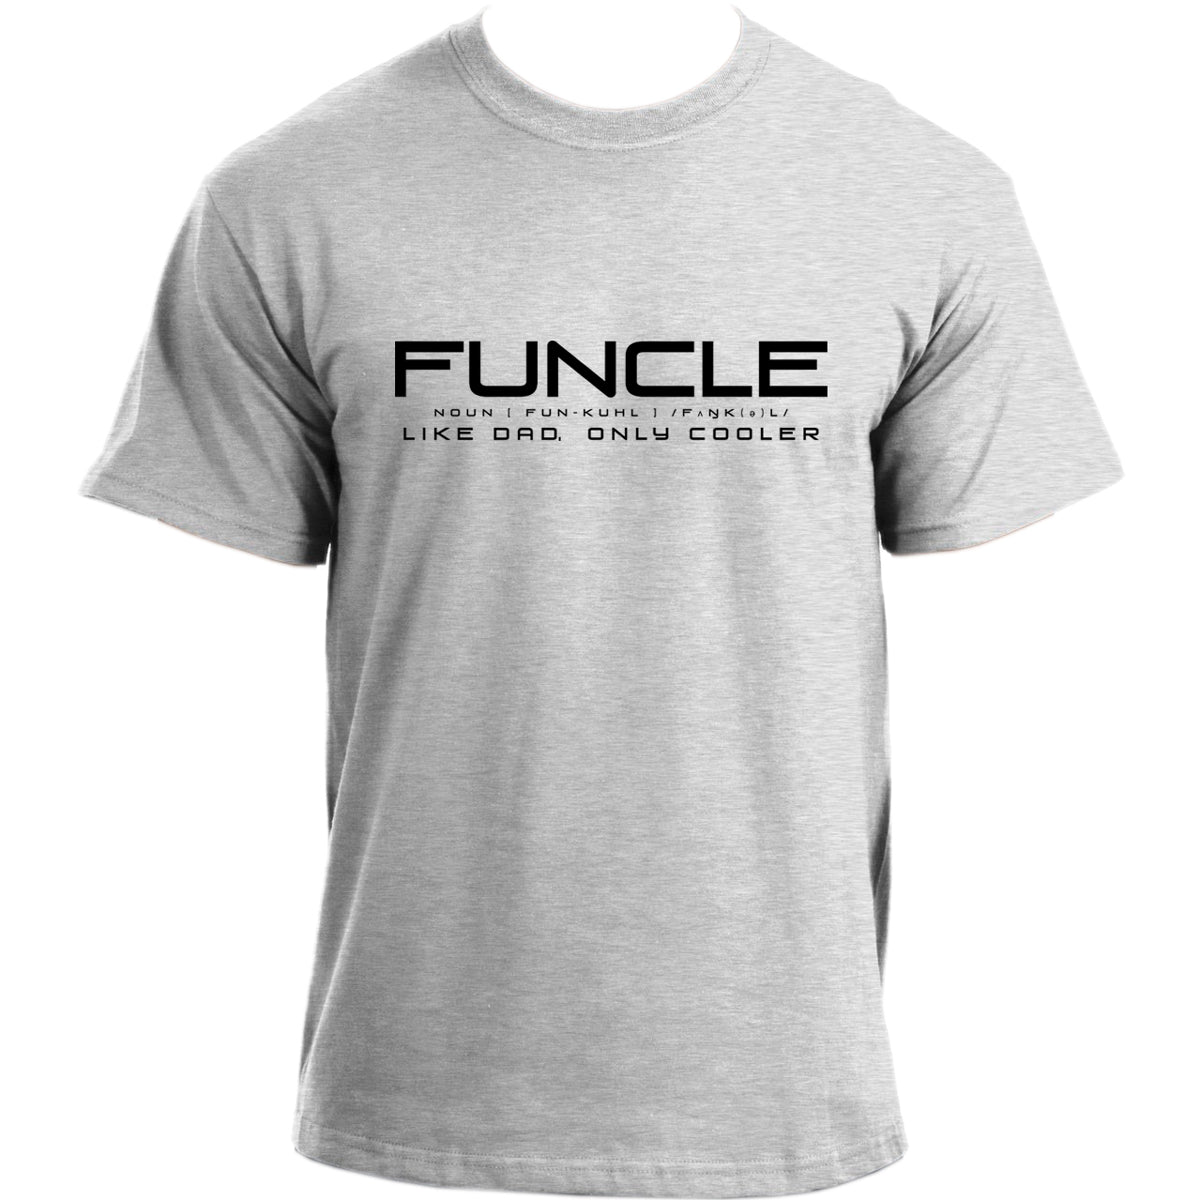 Funcle Uncle T Shirt I Cool Uncle Tshirt I Novelty Humor Very Funny Uncle T-shirt